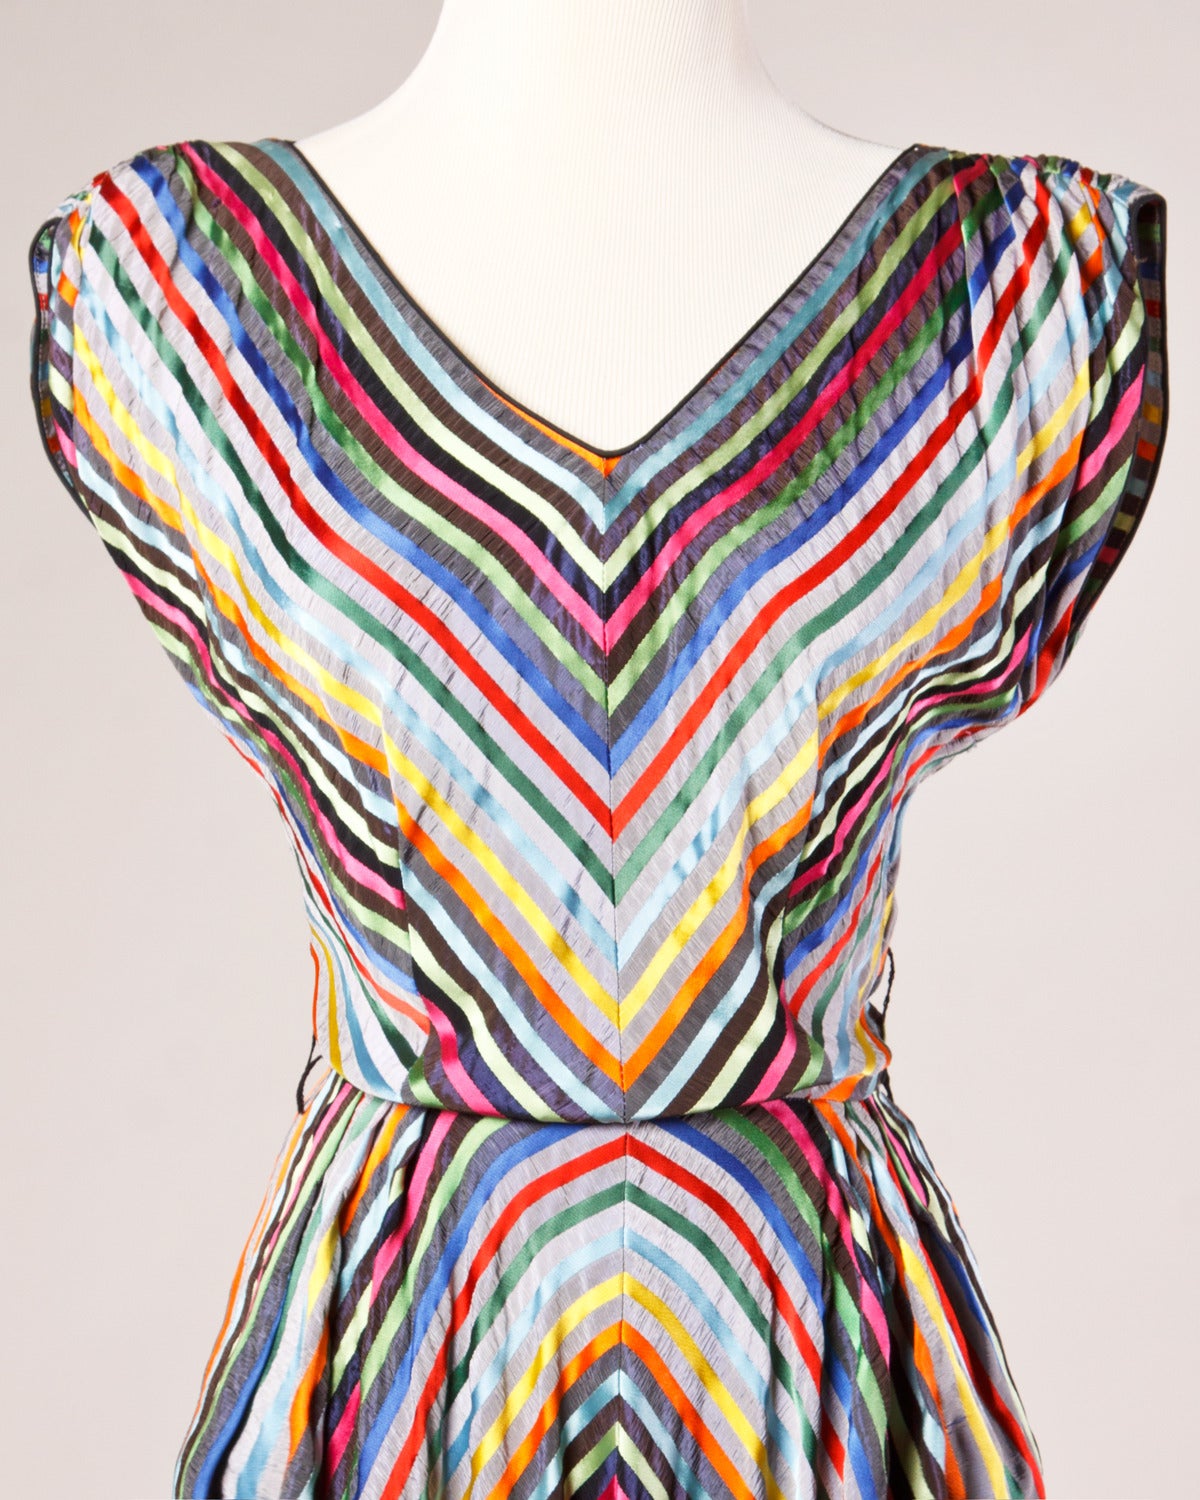 Gorgeous vintage party dress in colorful rainbow stripes. Full sweep with gathered shoulders and a V-neckline. 

Details:

Side Metal Zip Closure
Unlined
Multicolor Rainbow Striped Fabric
Full Sweep
Estimated Size